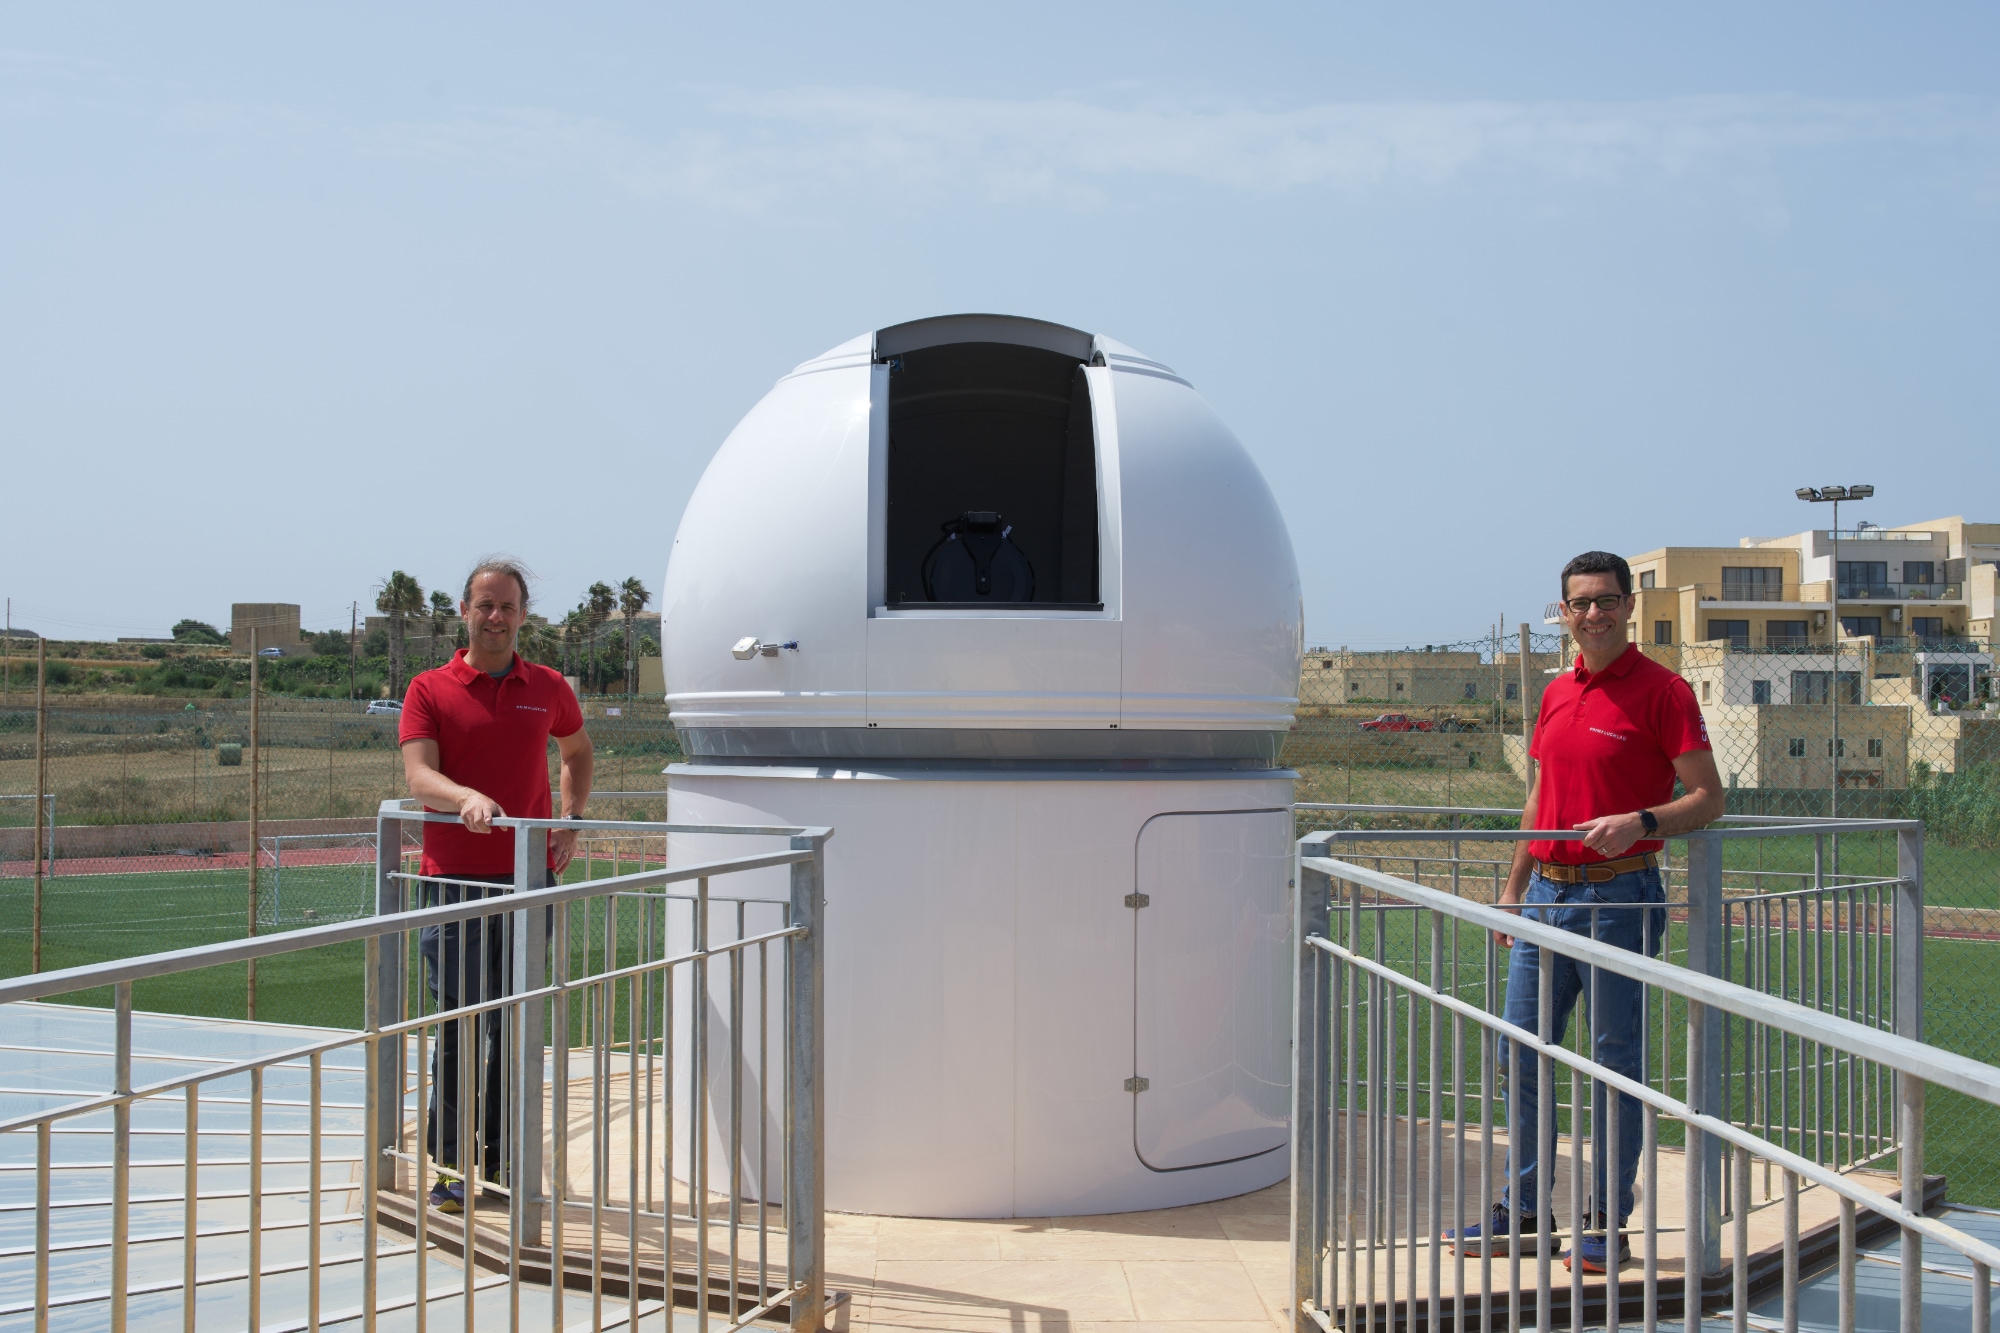 COMPACT Observatory Station installed in Gharb, island of Gozo, Malta